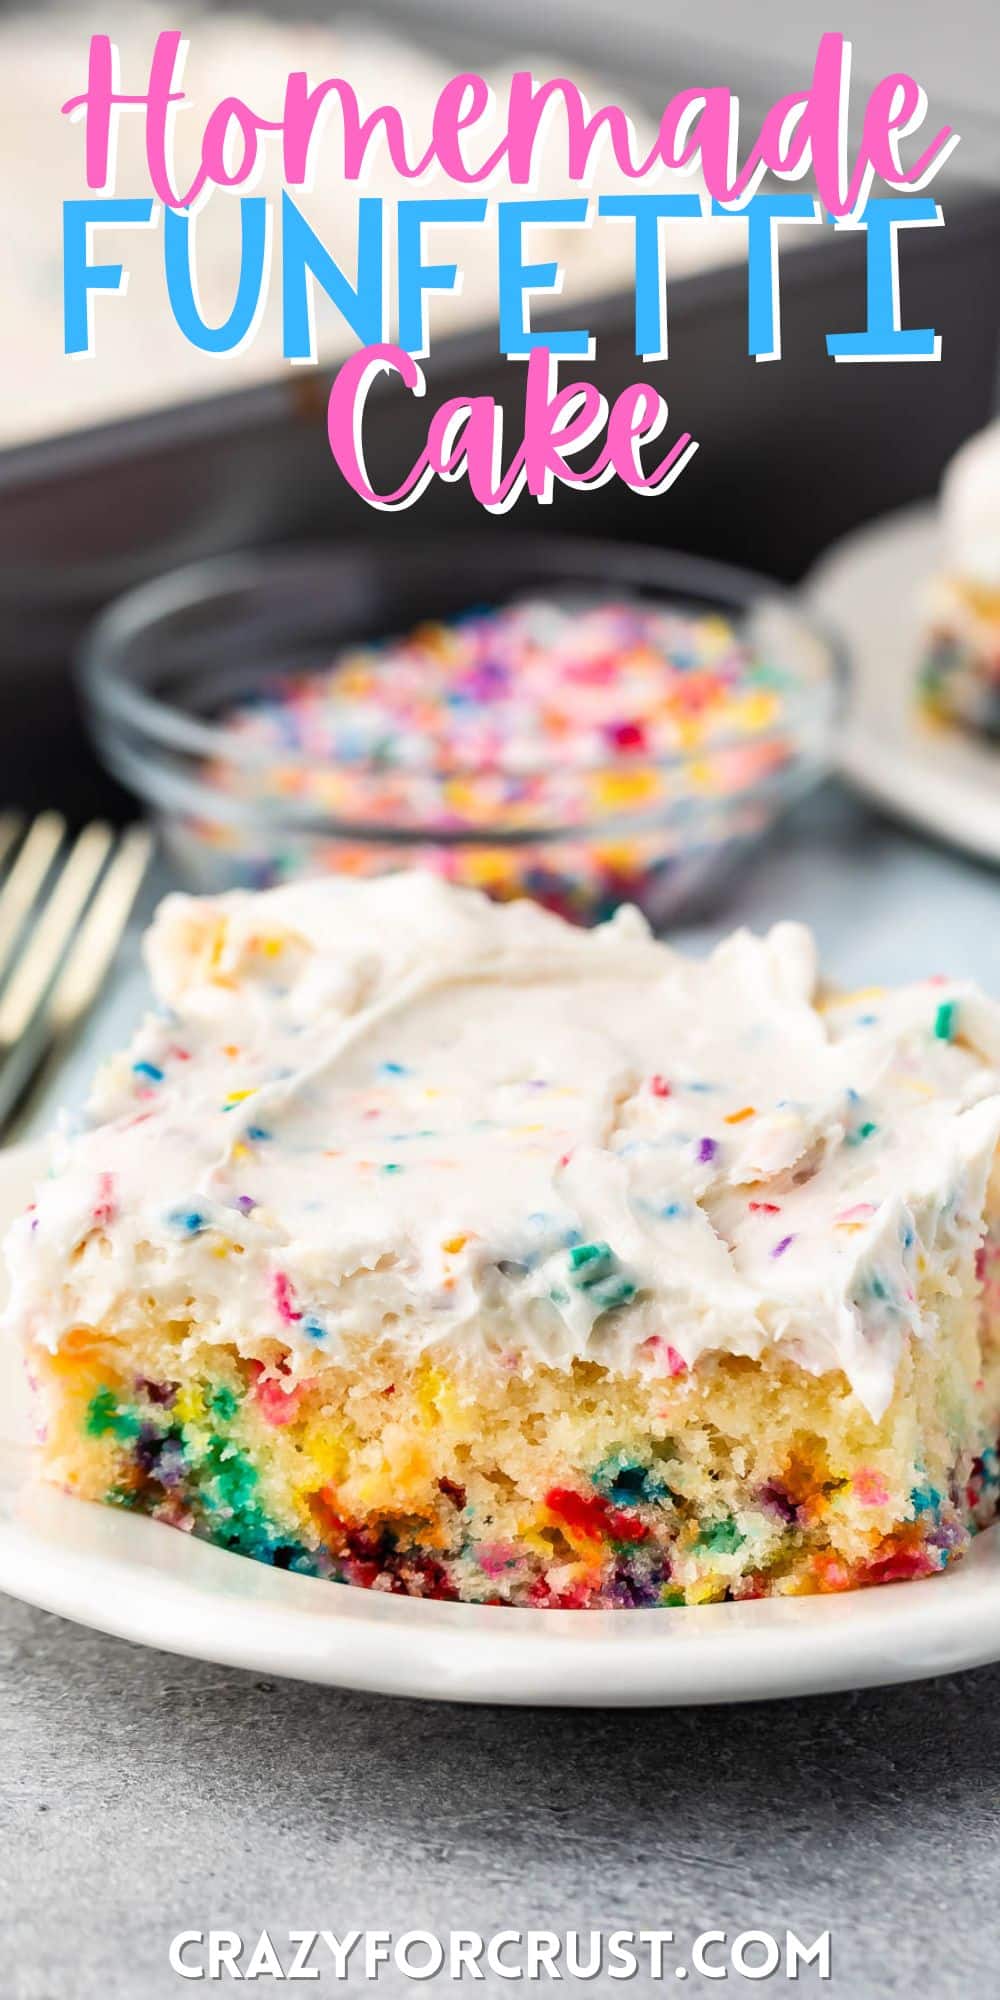 white cake with colorful sprinkles baked in and white frosting with more sprinkles mixed in on top with words on the image.